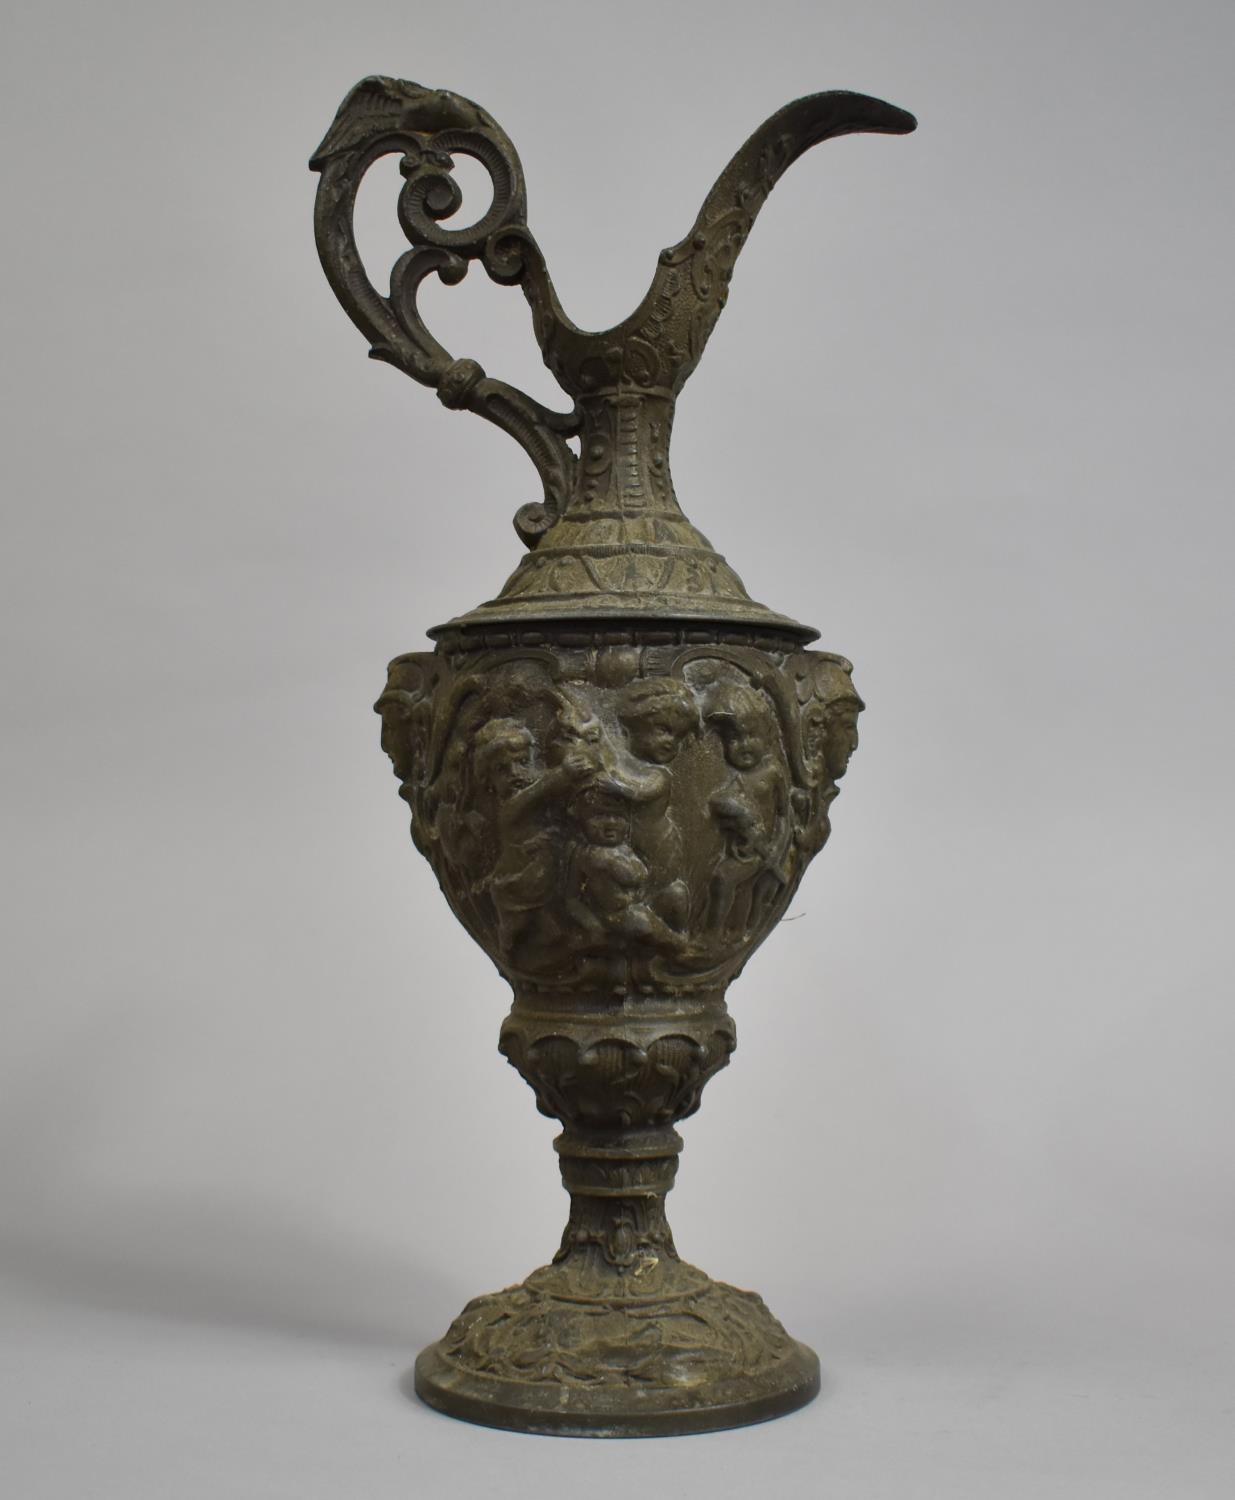 A Large Metal Continental Claret Jug, The Body Decorated in Heavy Relief Depicting Cherubs Playing - Image 2 of 2